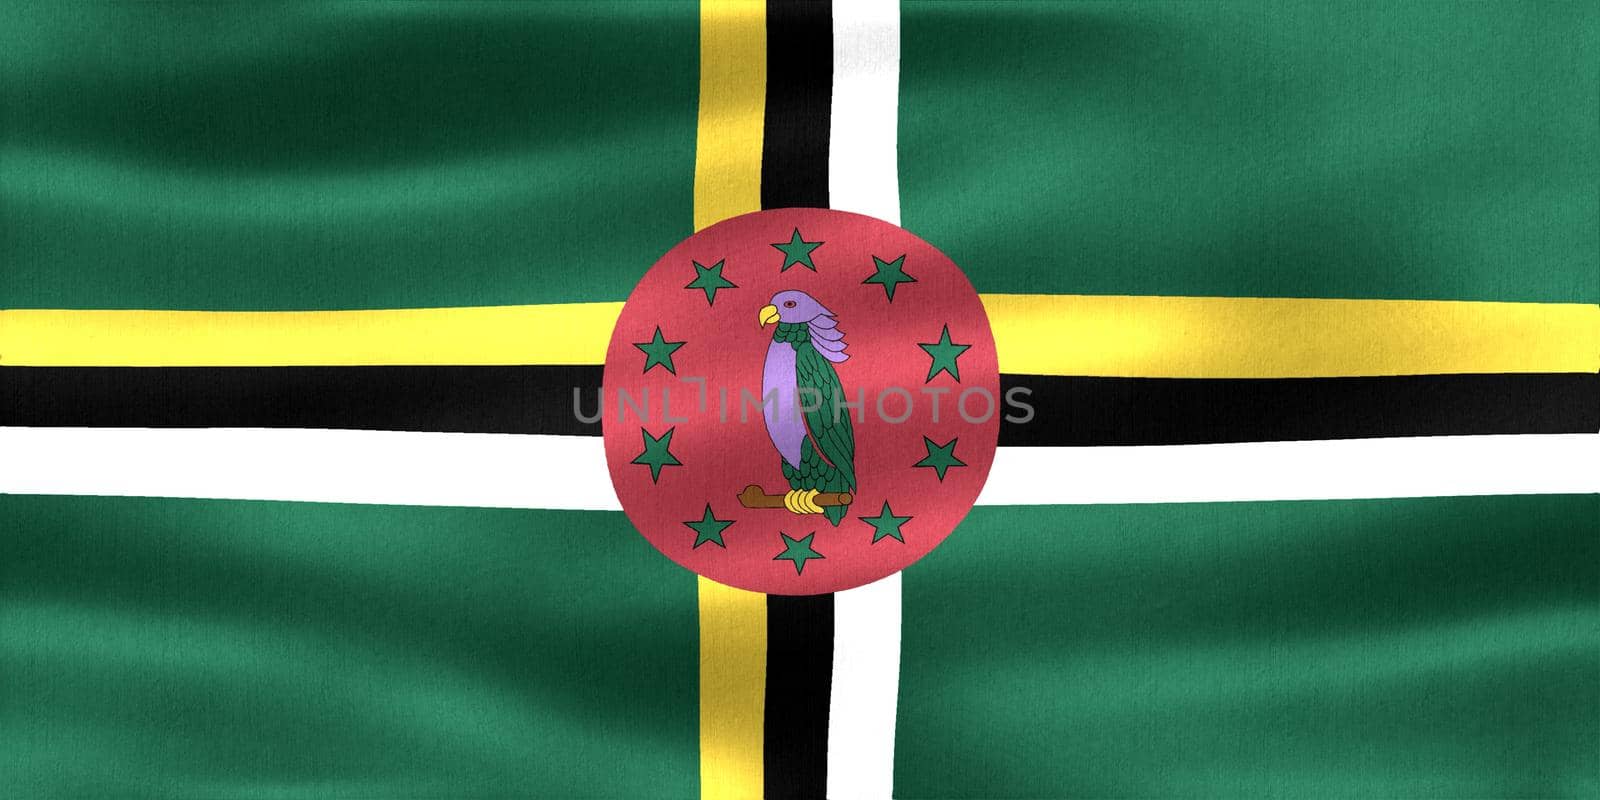 Dominica flag - realistic waving fabric flag by MP_foto71